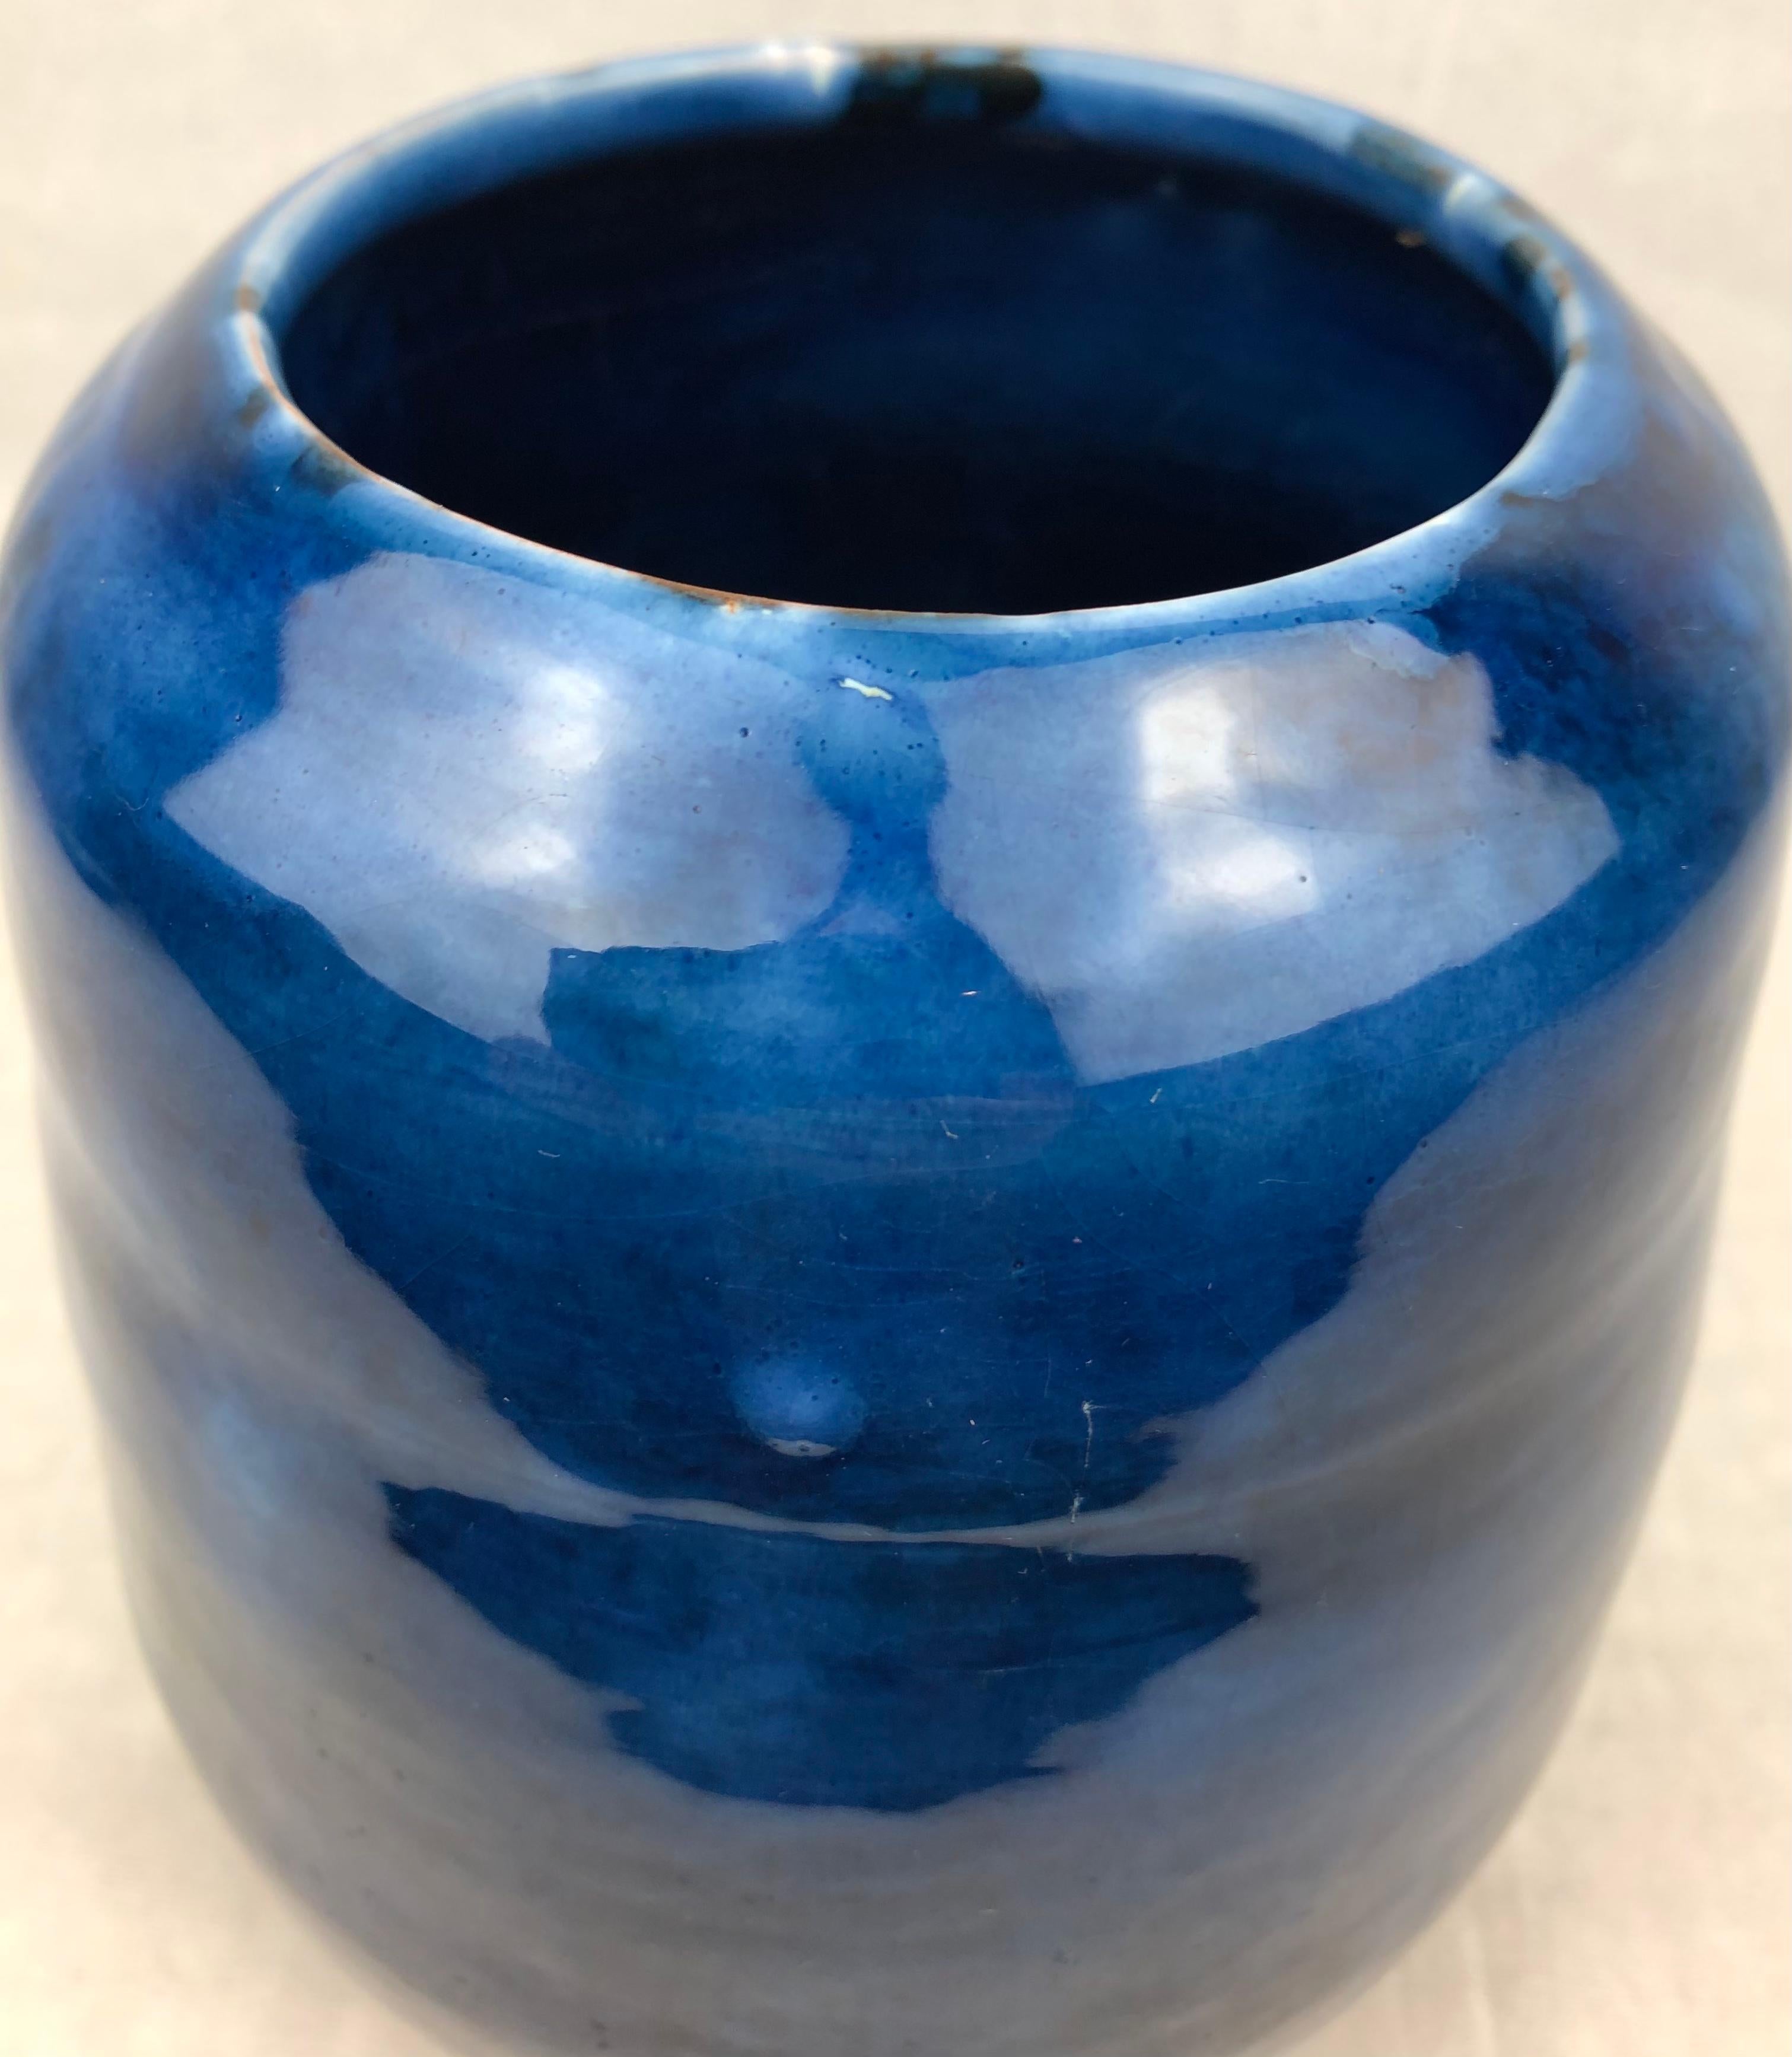 Midcentury French ceramic vase in a stunning cobalt blue color, glazed. 
Signed piece, unknown ceramic artist. 

This gorgeous decorative object will enhance any table, shelf or countertop. 
Very good vintage condition, no visible cracks or chips.
 